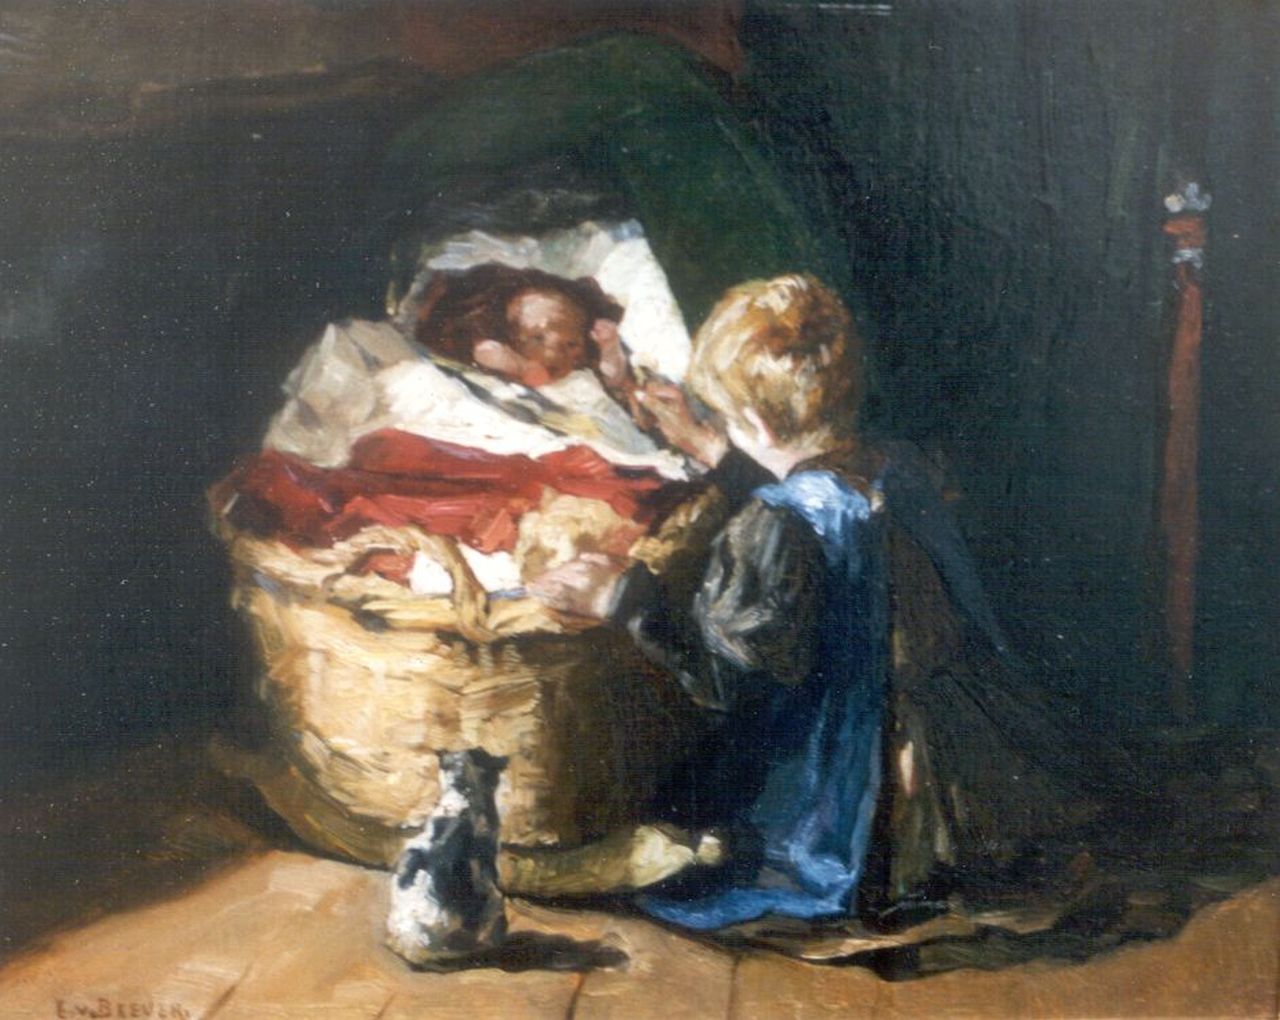 Beever E.S. van | 'Emanuël' Samson van Beever, The new baby, oil on panel 25.0 x 31.5 cm, signed l.l.